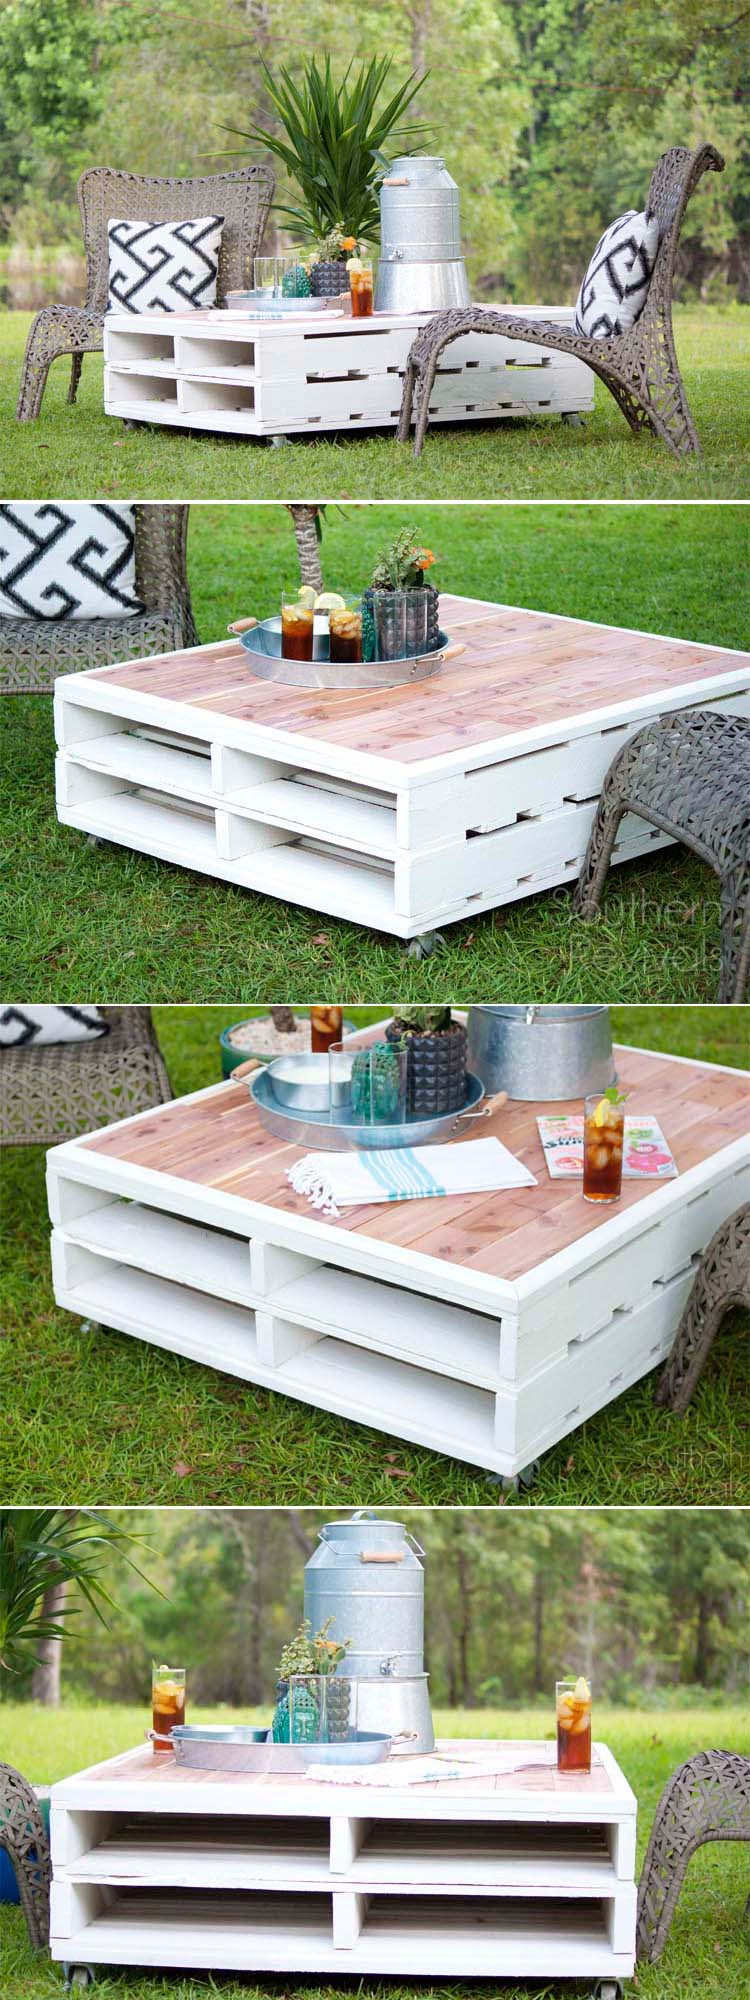 DIY Projects Outdoor
 29 Best DIY Outdoor Furniture Projects Ideas and Designs